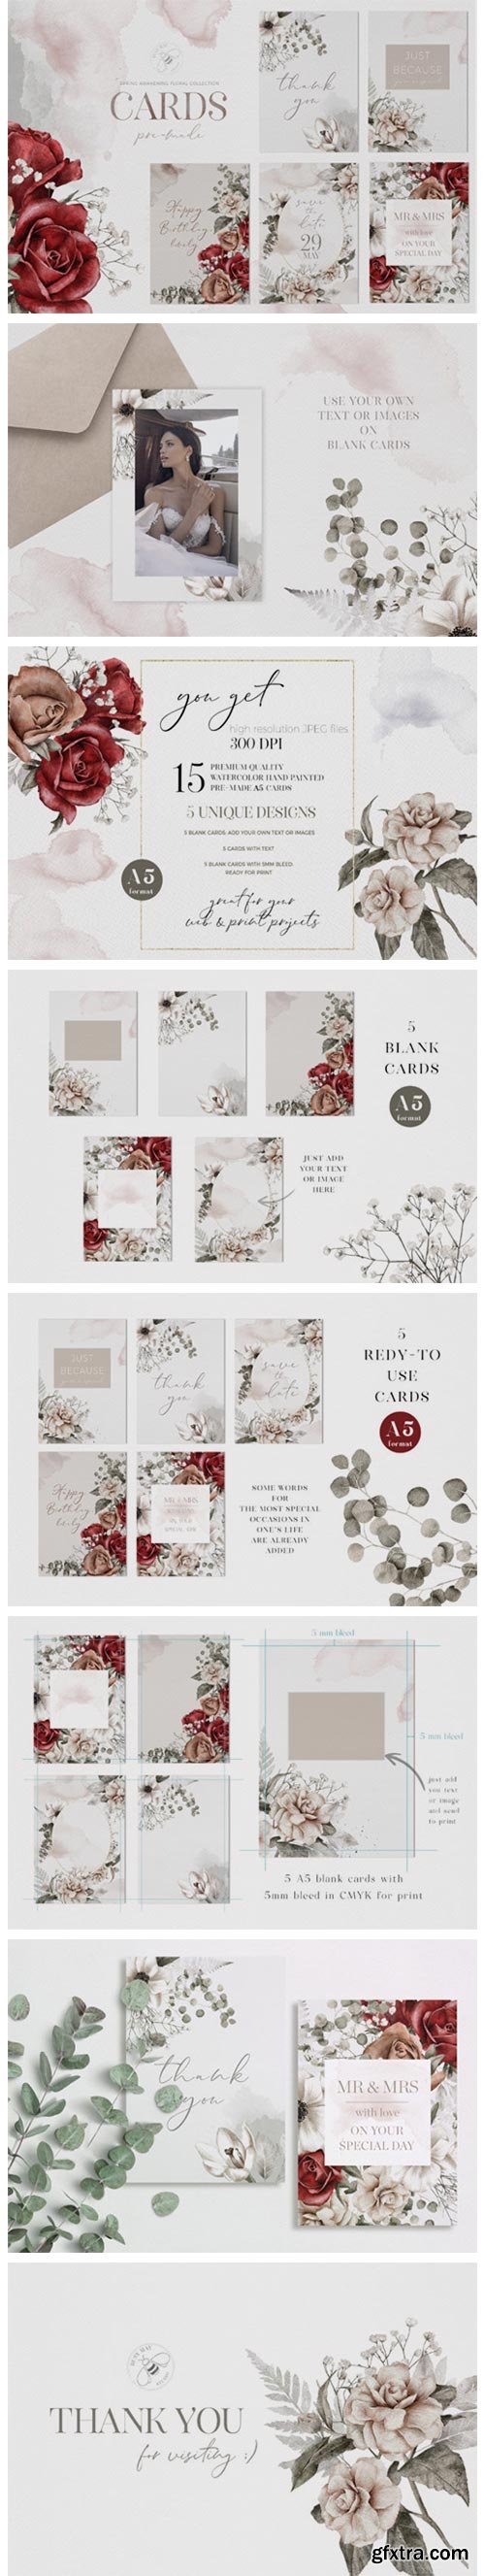 Watercolor Floral Cards Templates CMYK 7166578